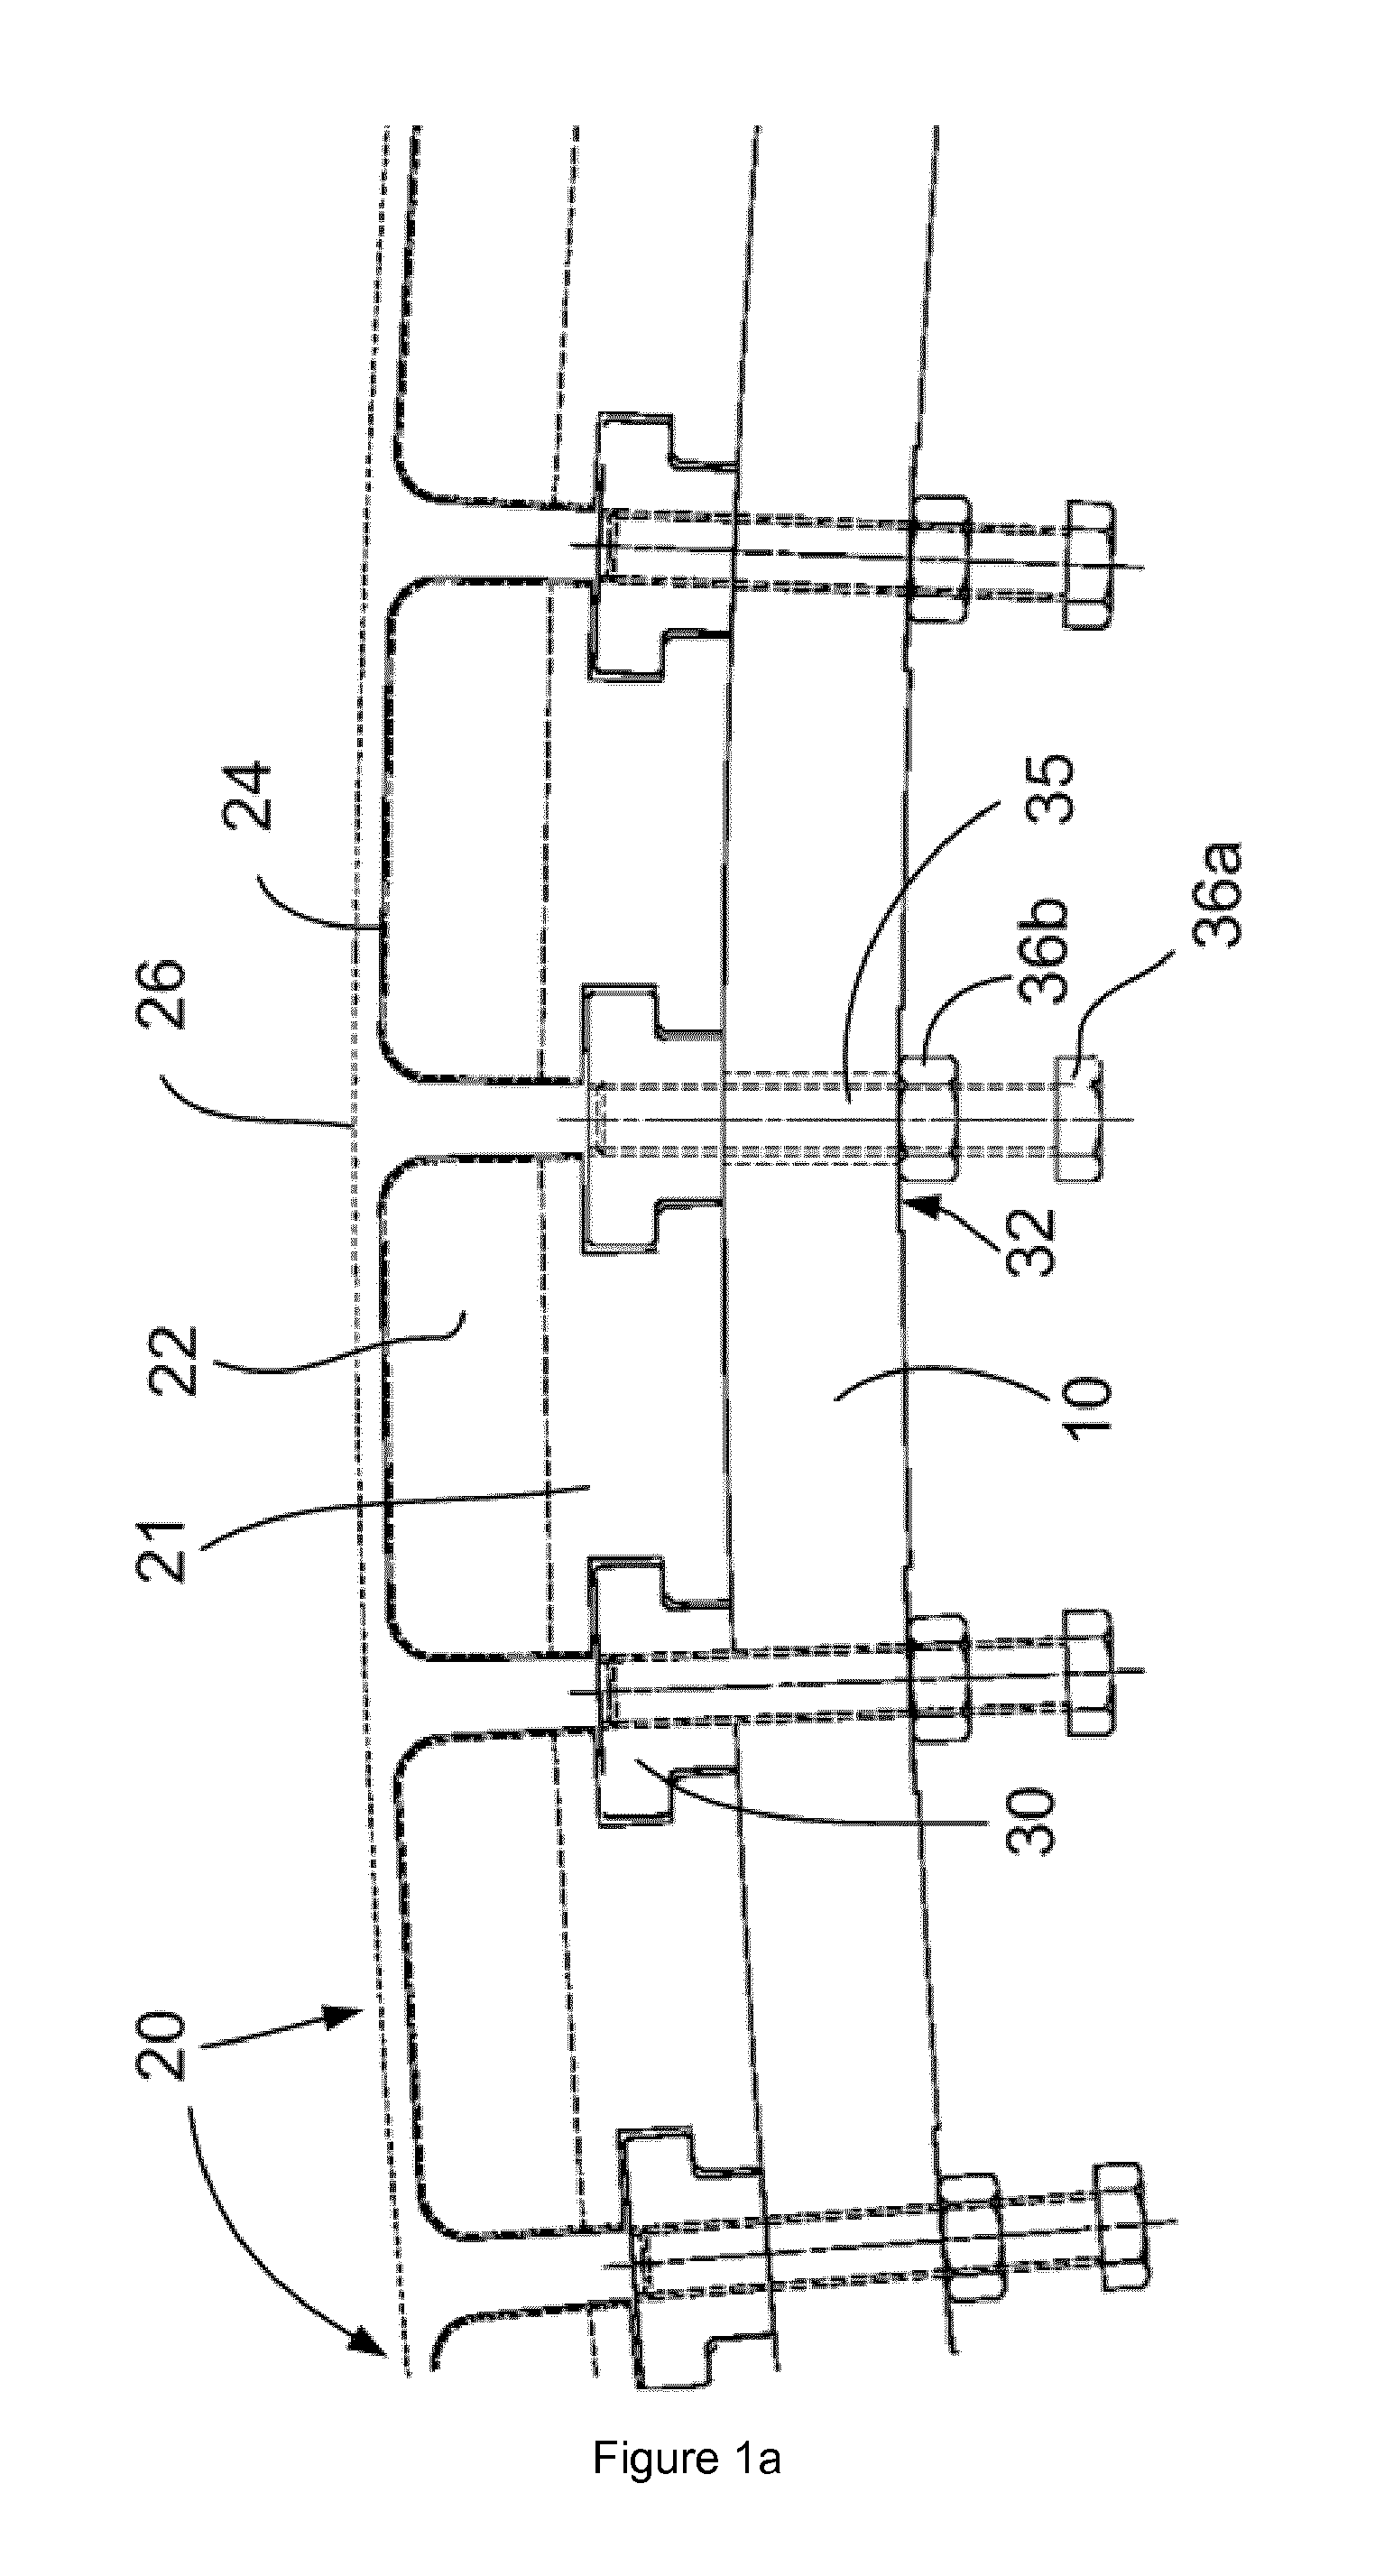 Generator rotor, assembly method and related insertion tool